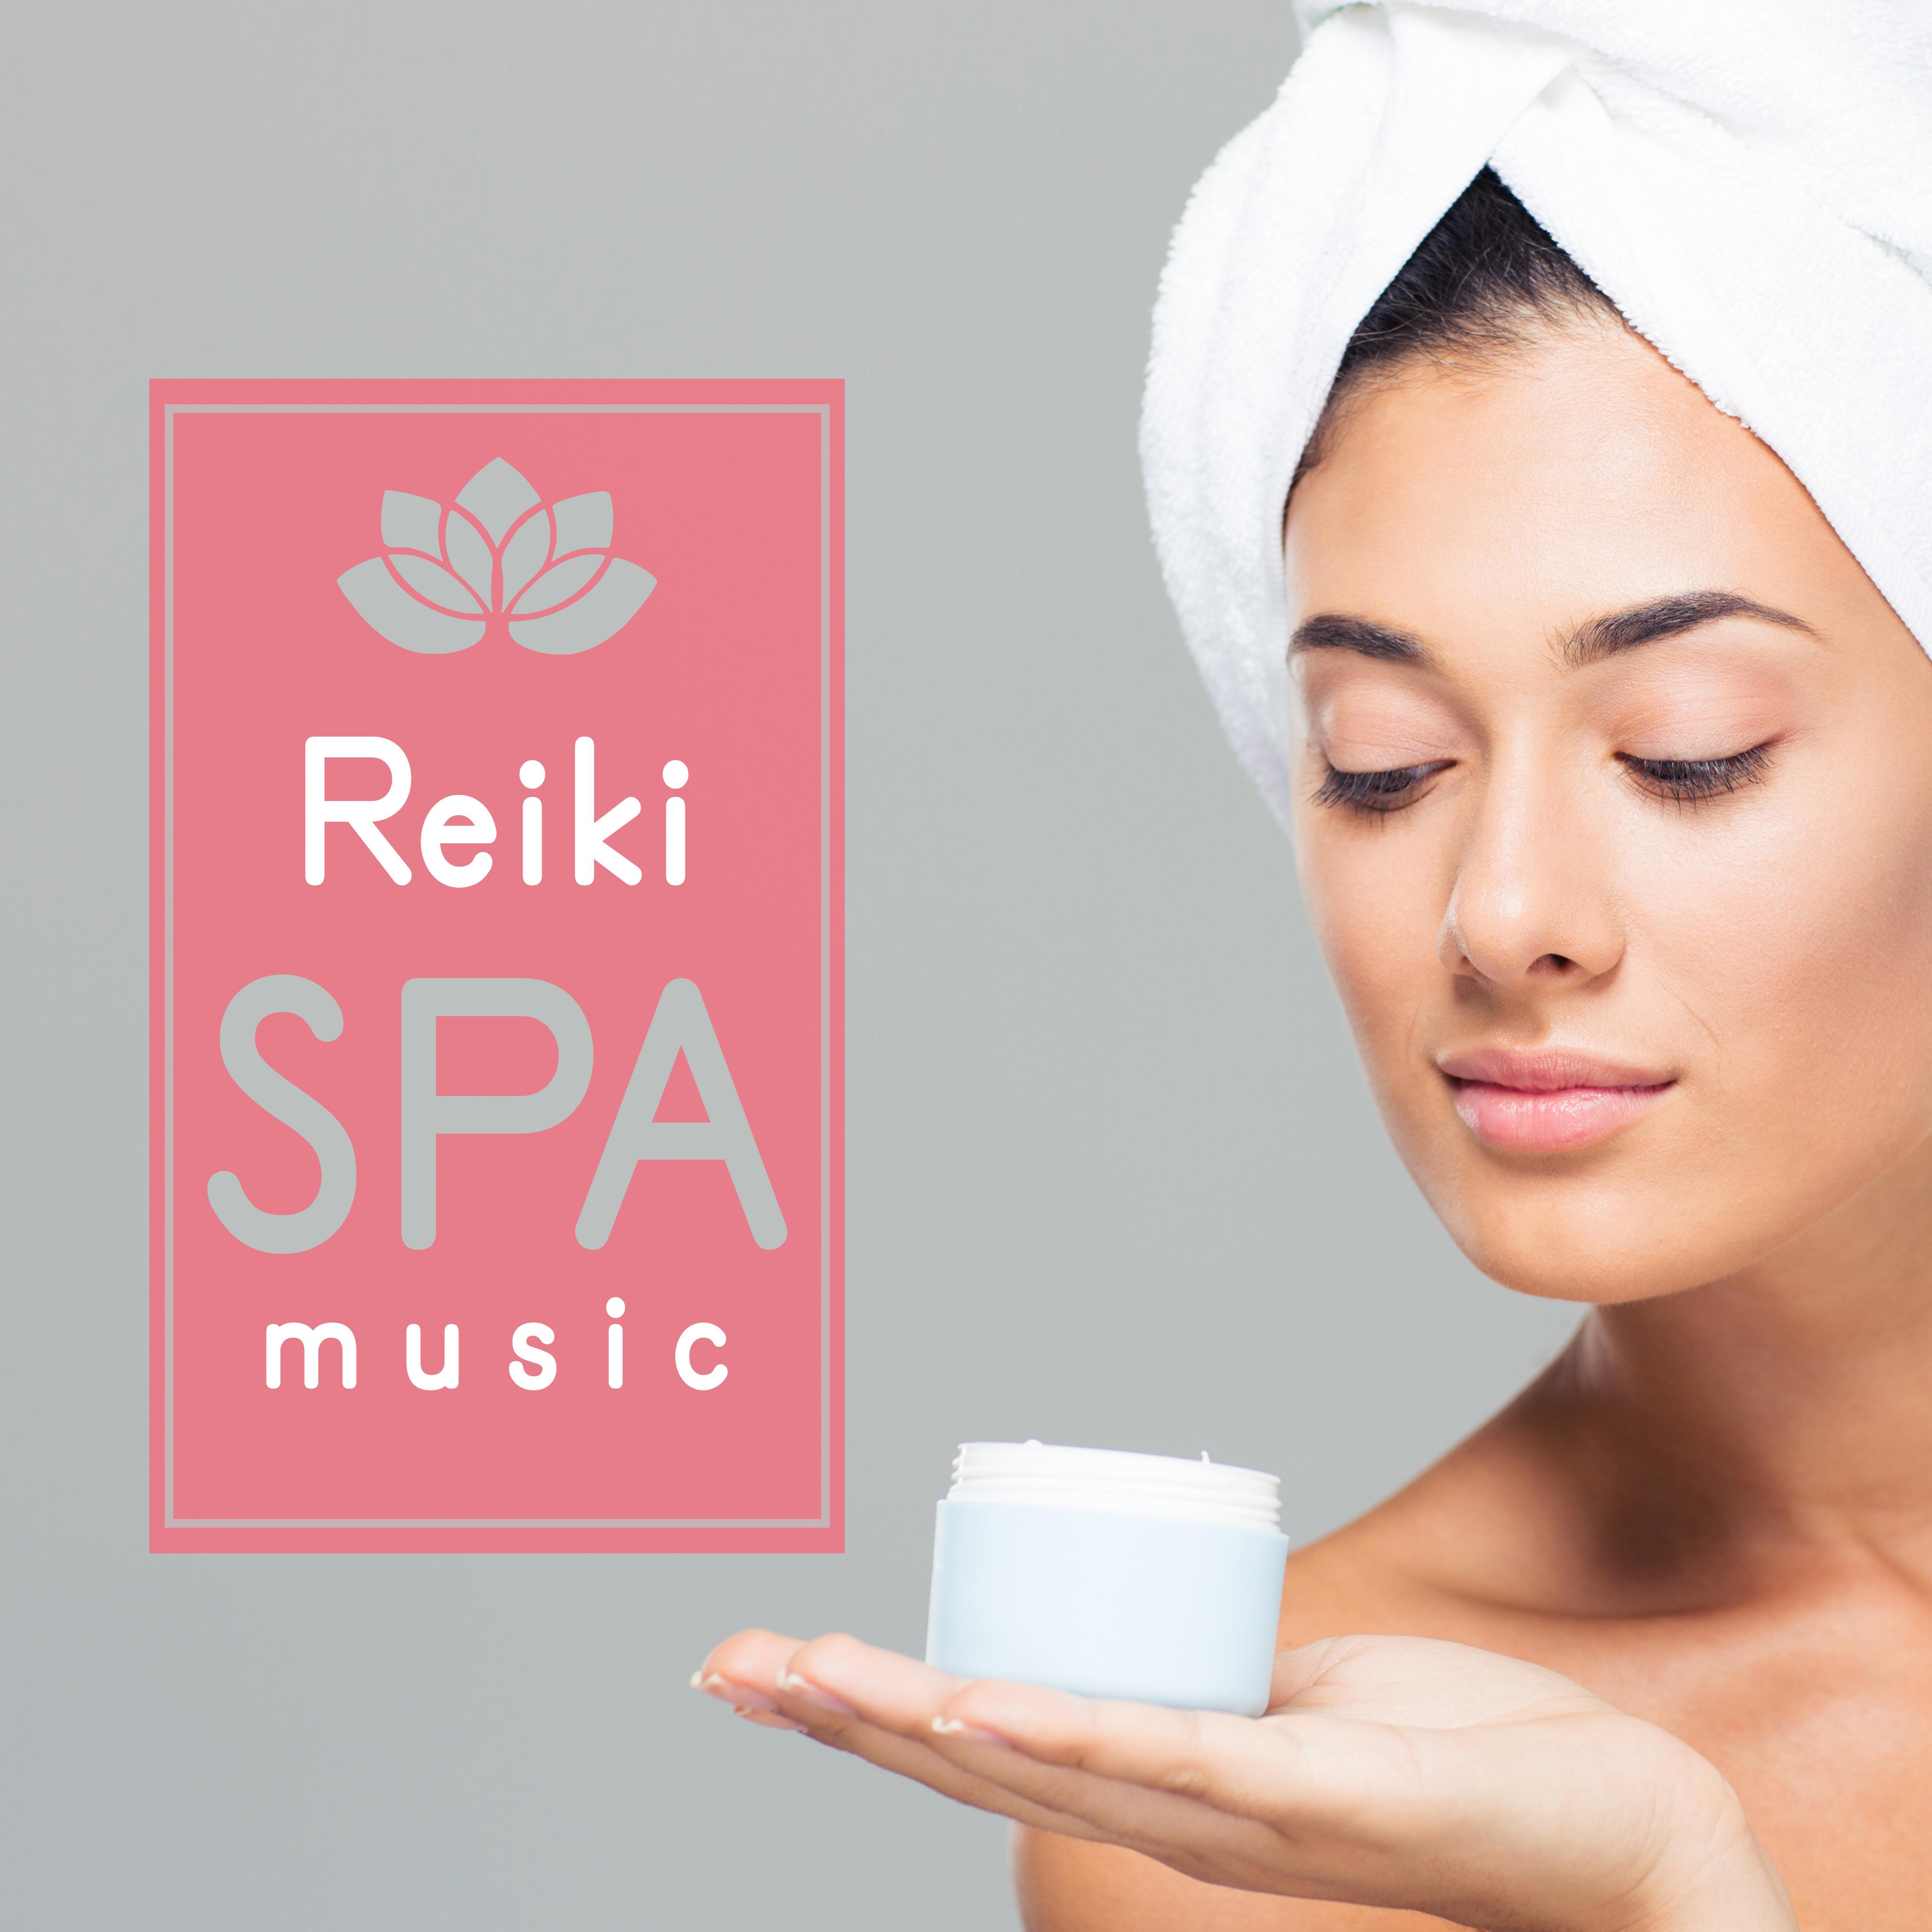 Reiki Spa Music – Greatest Nature Sounds of Birds and Ocean Waves, Relaxing Music for Total Rest, Calming Sounds of New Age Music